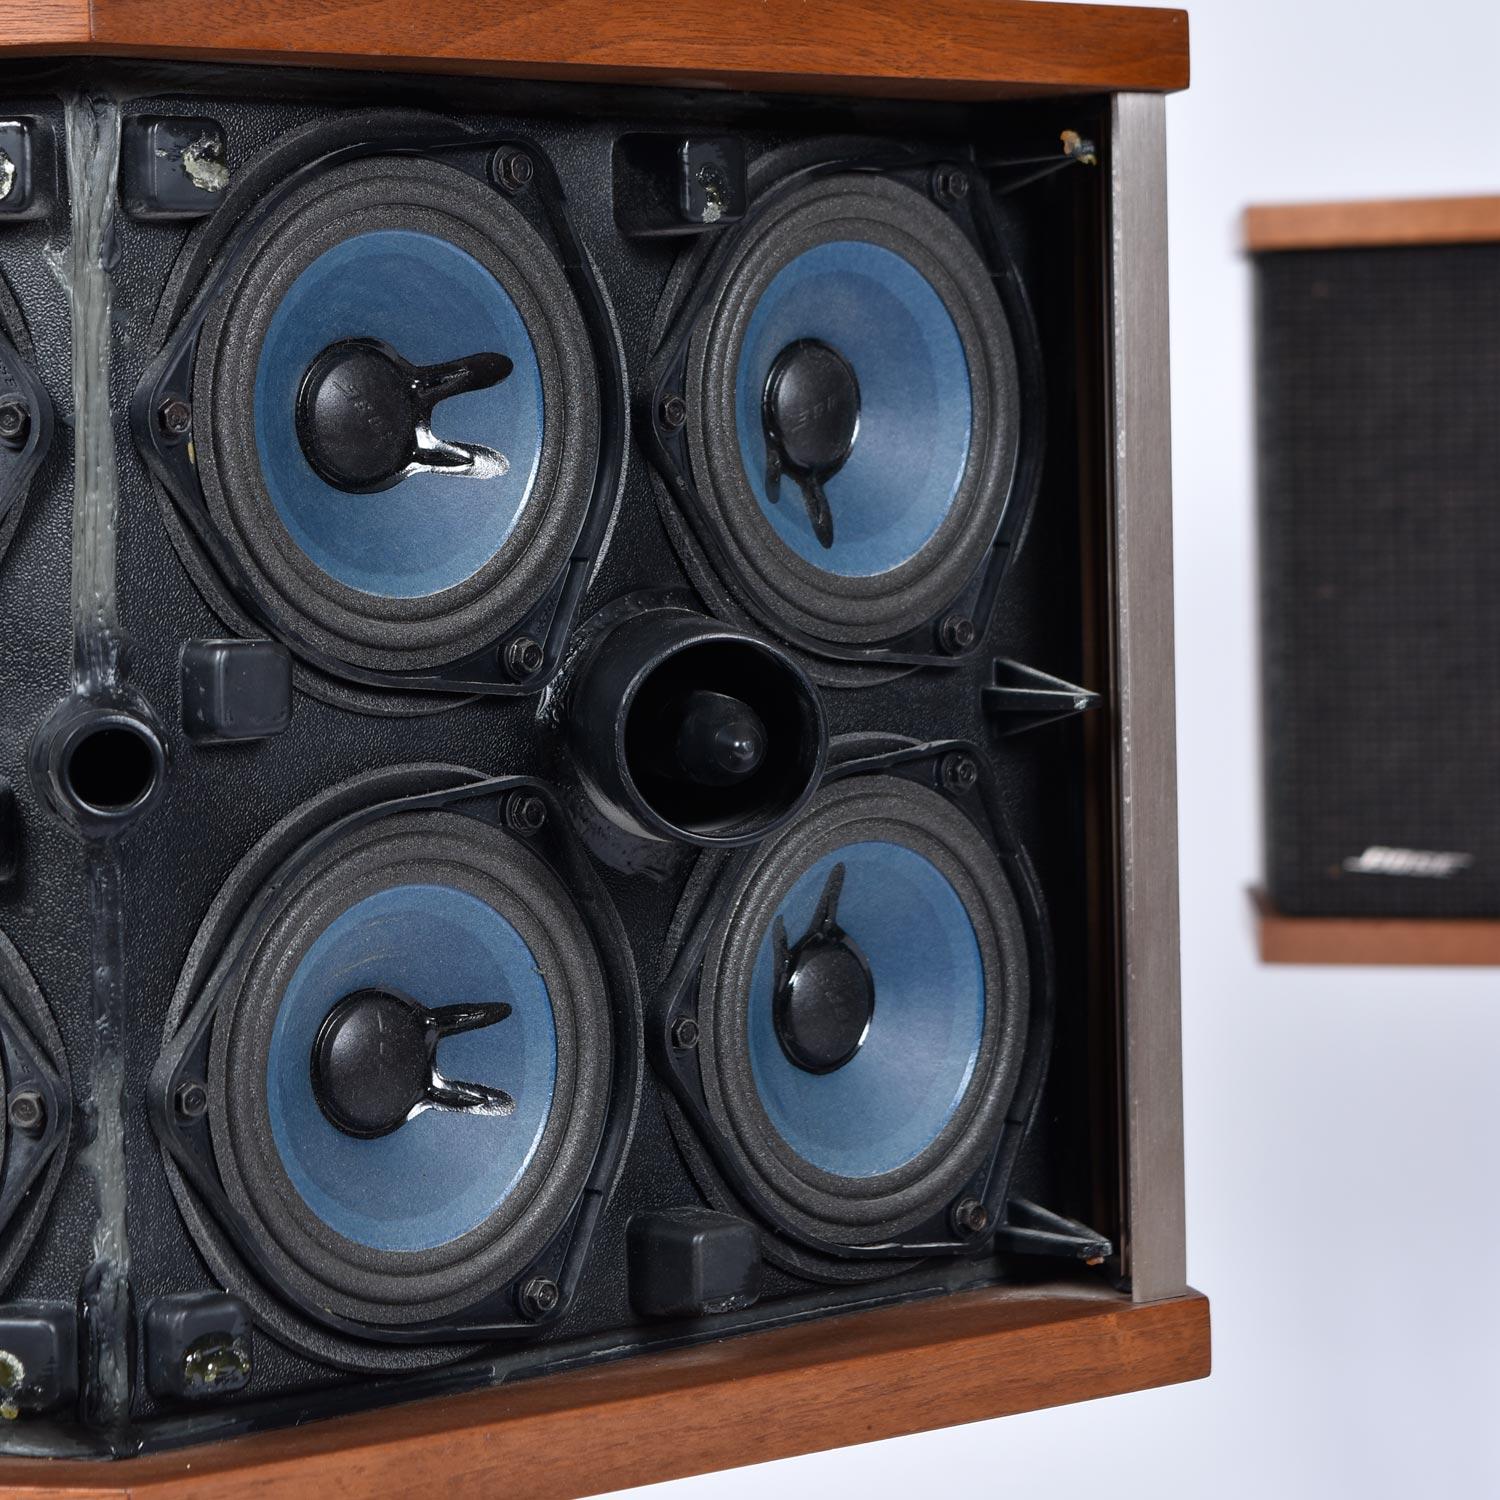 Restored Vintage 1983 Bose 901 Series V Speakers with Tulip Stands and Equalizer 1